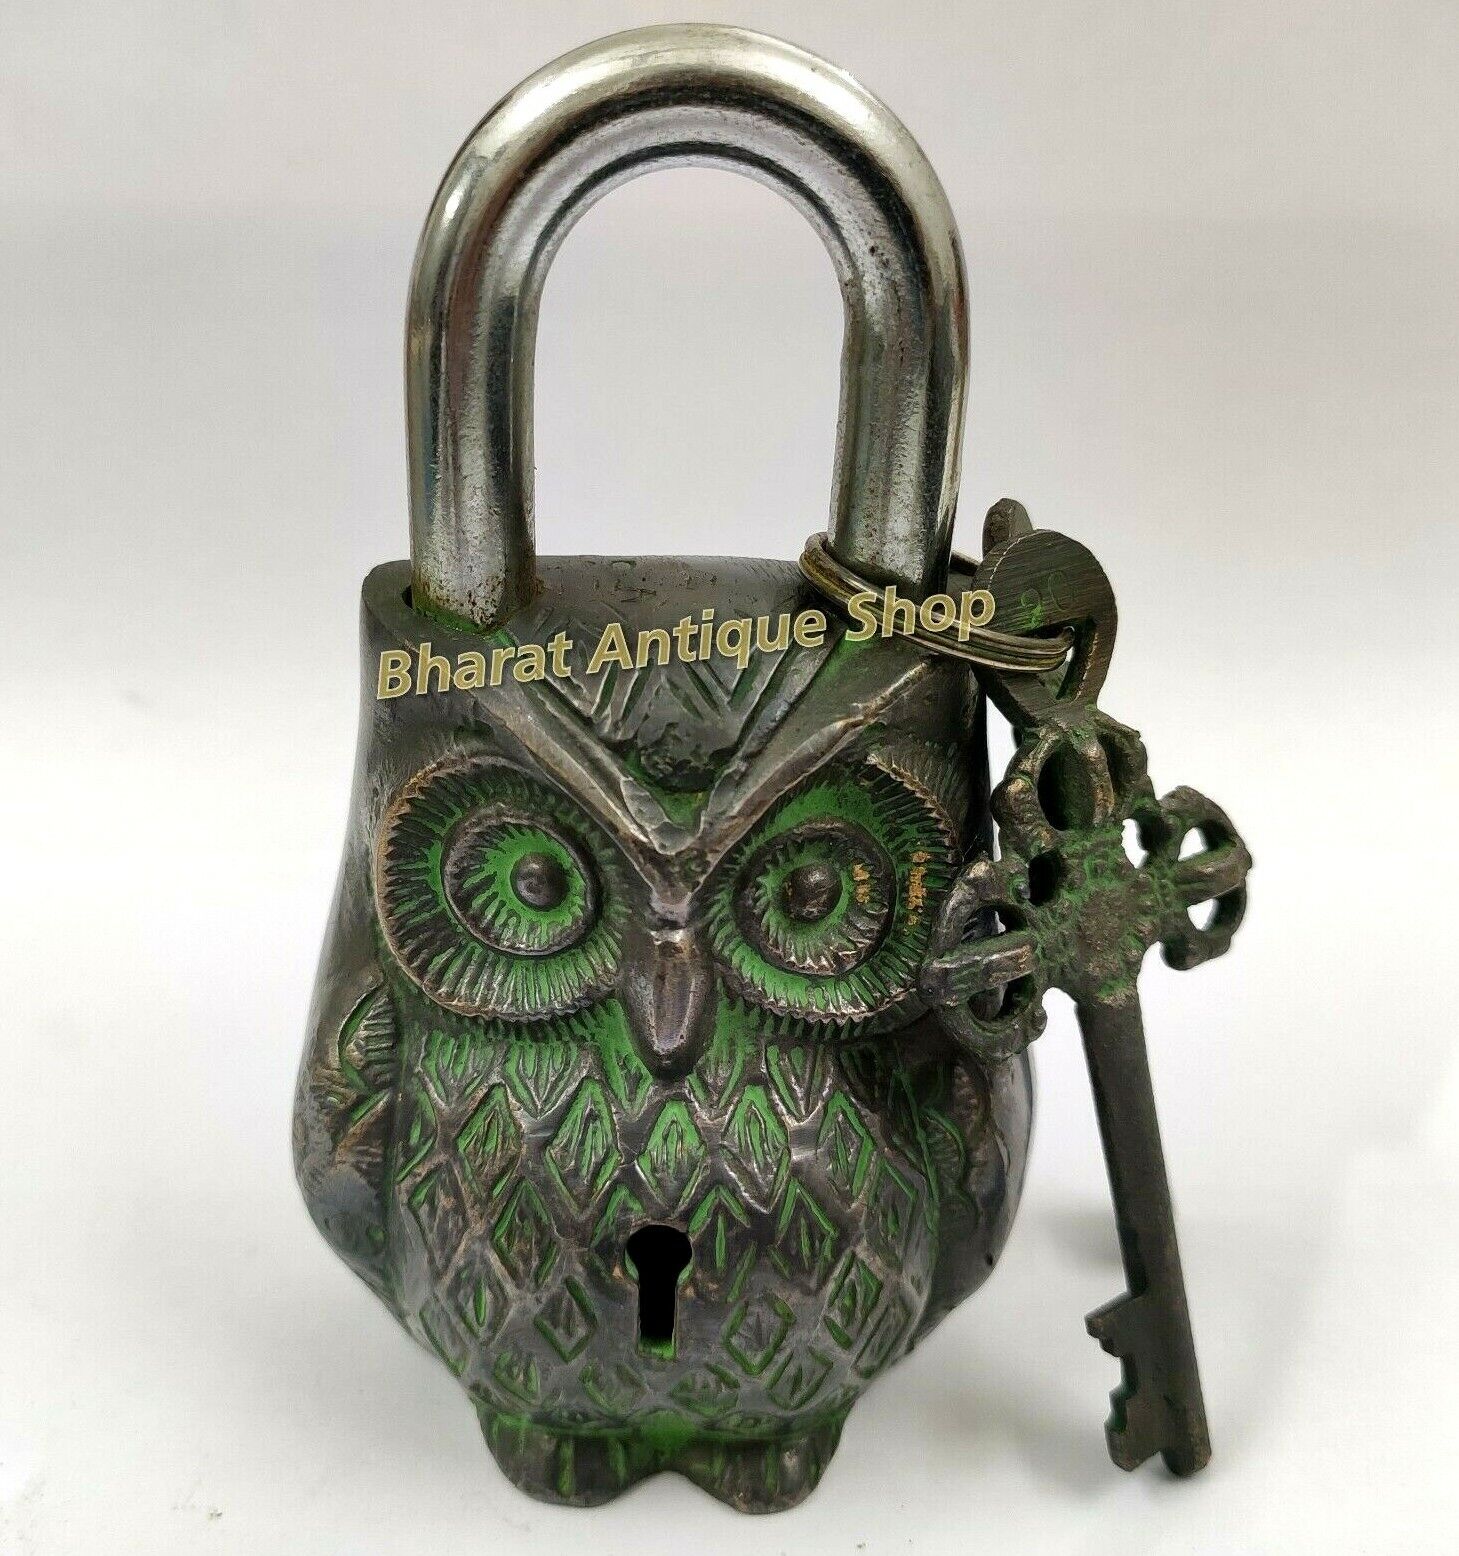 Real Antique Brass Owl Vintage Padlock with Working Key Rare Old Style